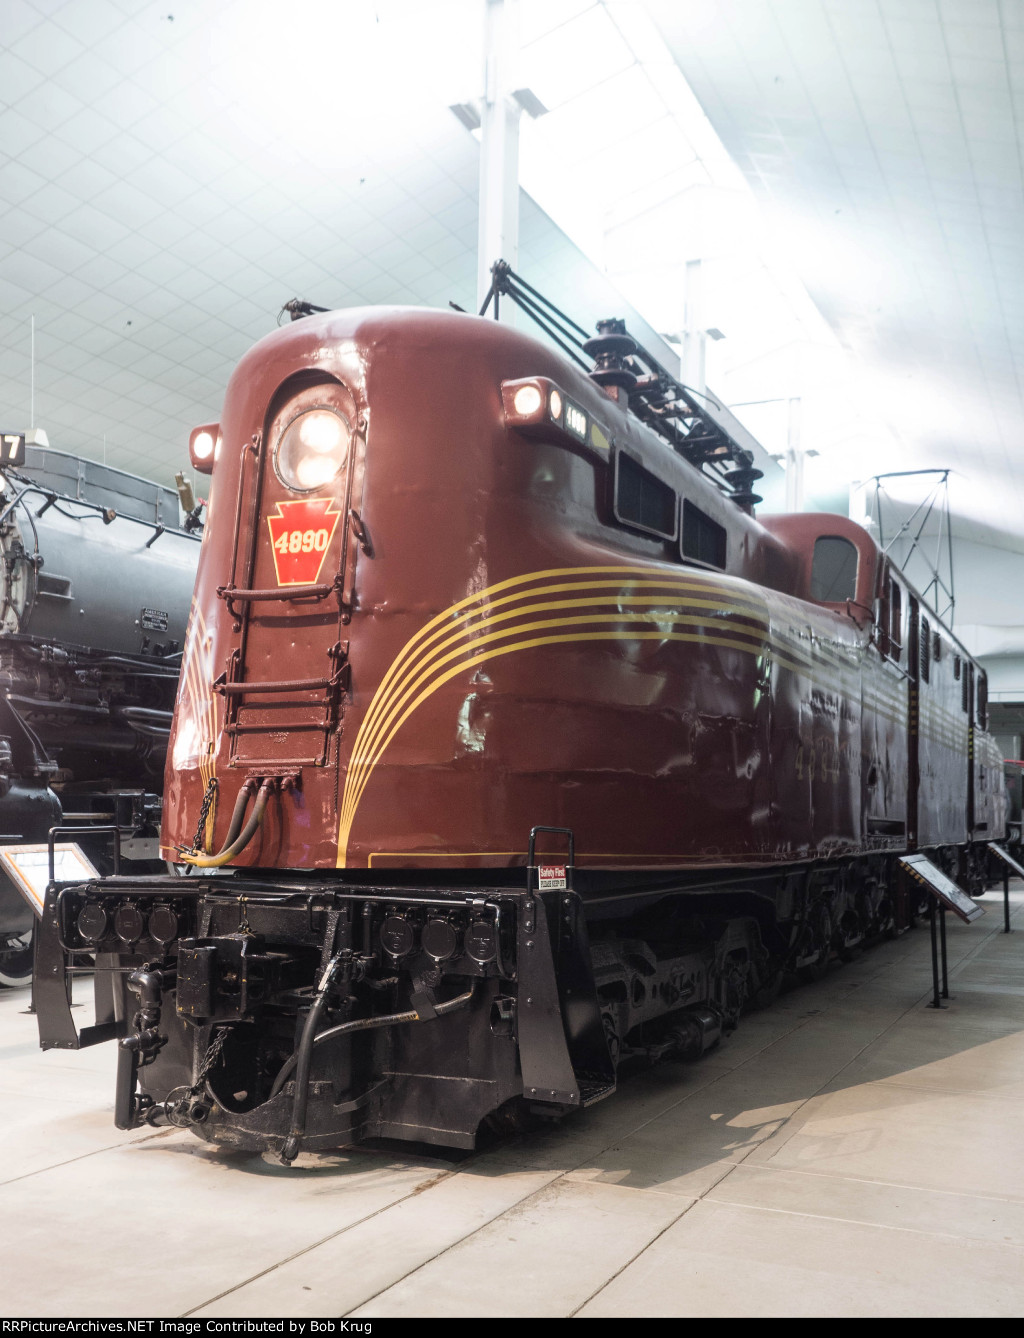 Pennsylvania Railroad GG-1 4890 in tuscan red paint scheme